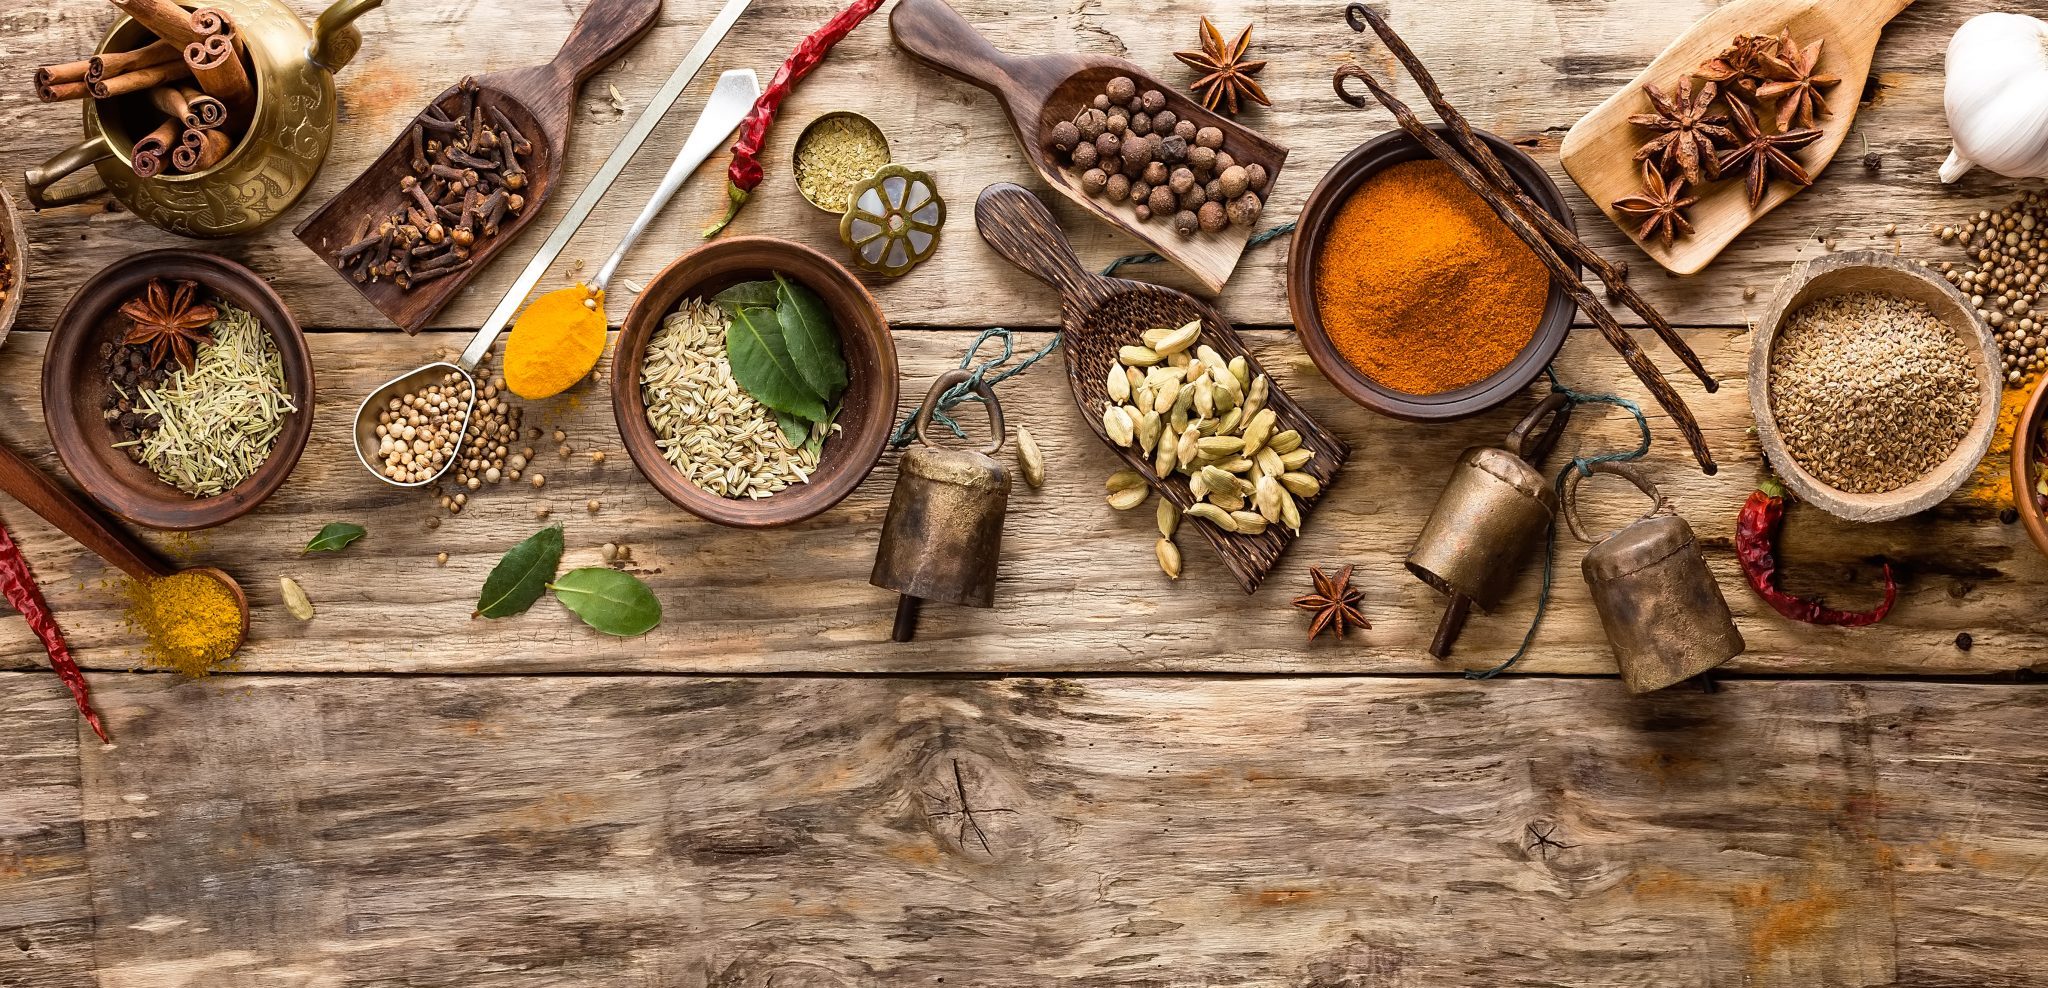 Top 5 Herbs and Spices to Boost Your Gut Health